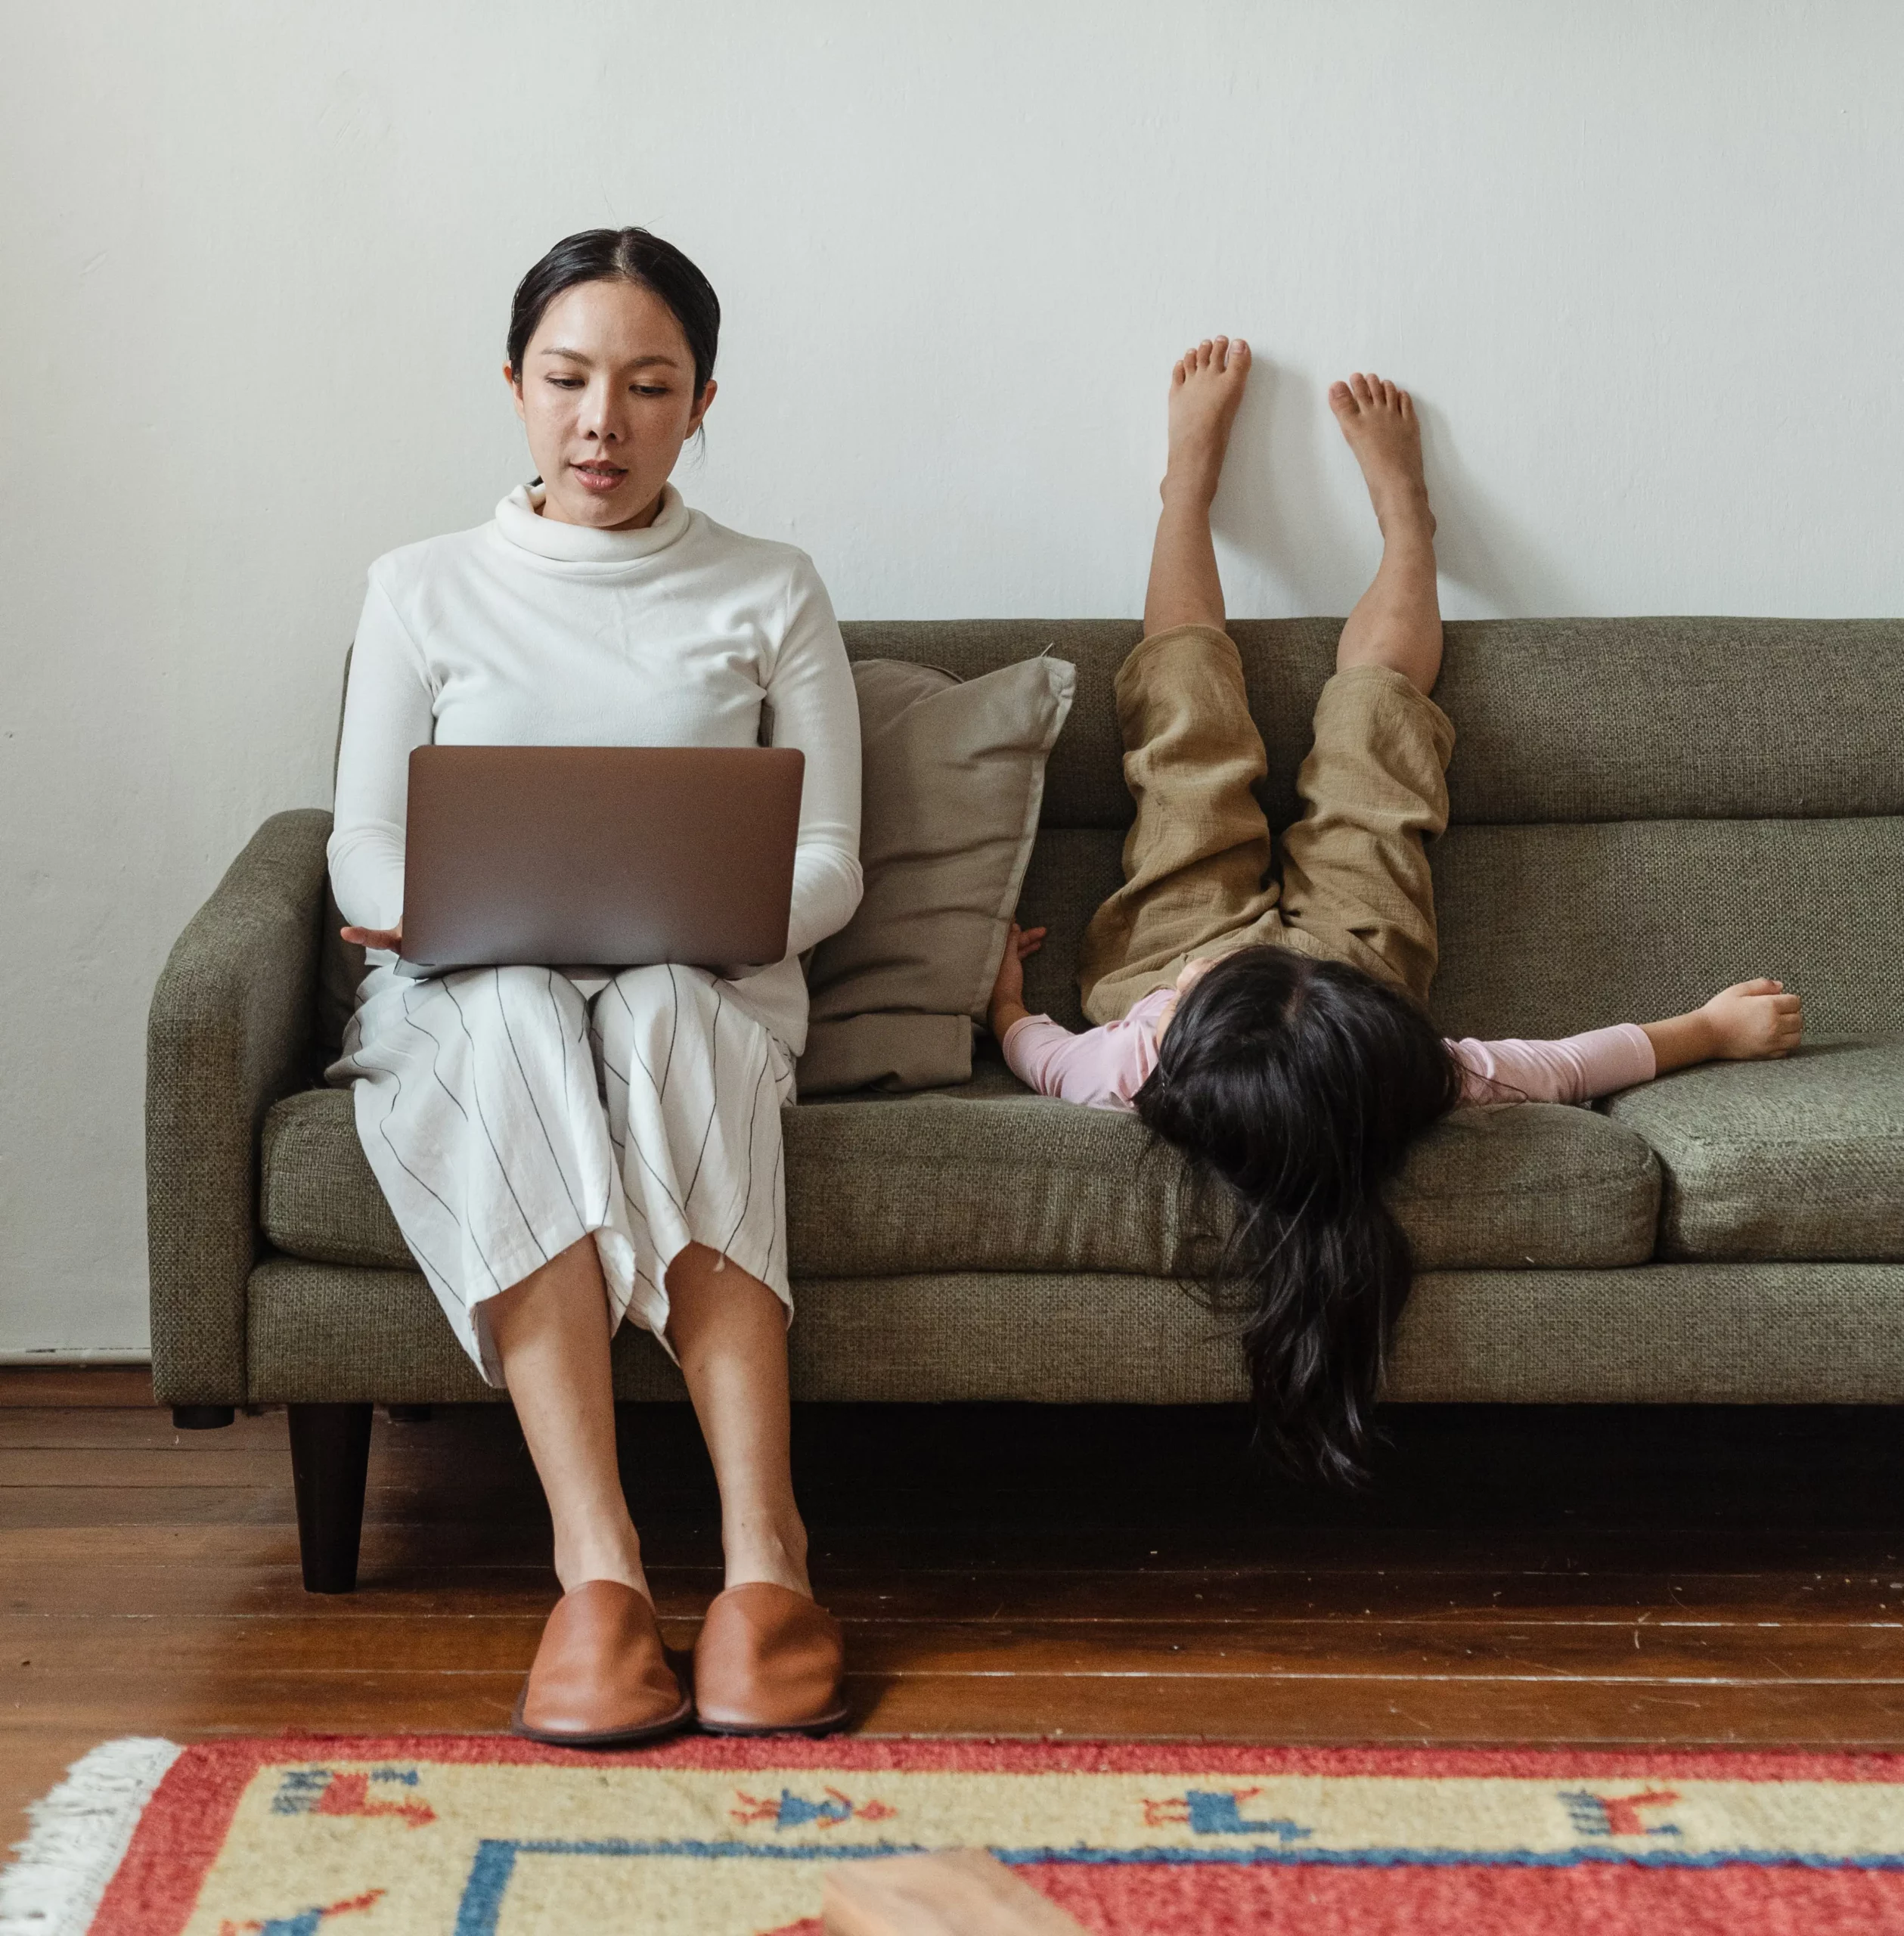 A woman doing remote working on a laptop next to a child on a couch.